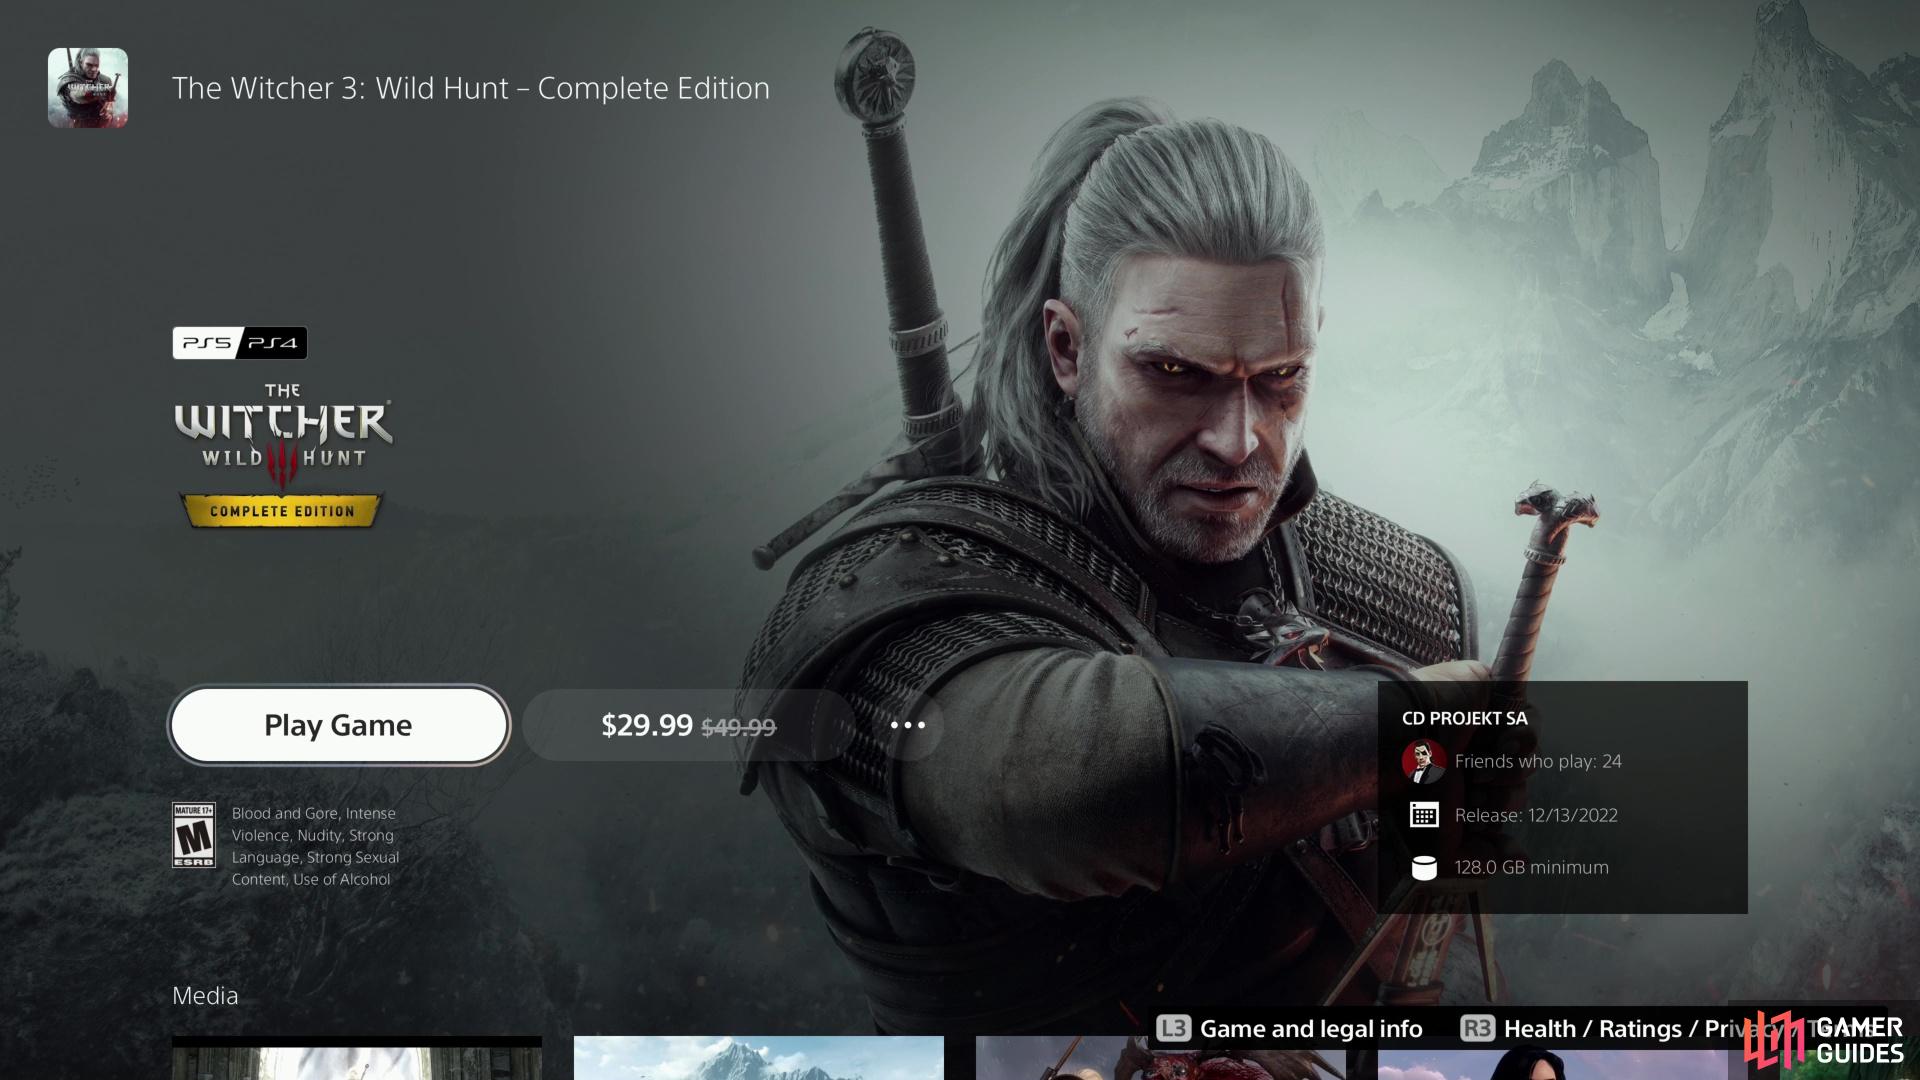 From the store page you can download the PlayStation 5 version of The Witcher 3.